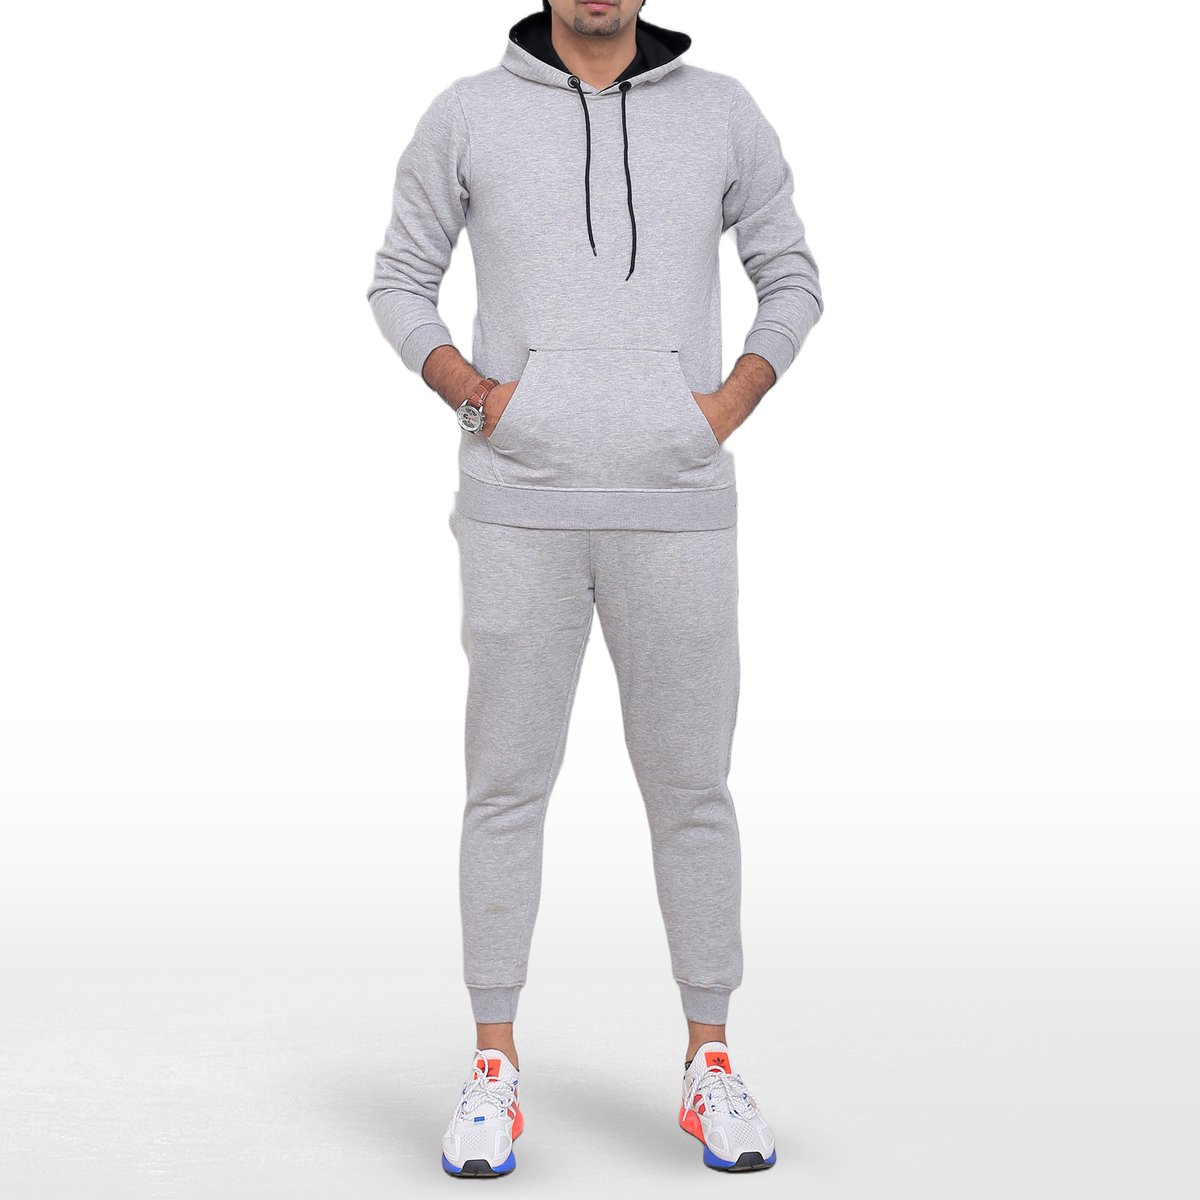 ICONICX Mens Plain Tracksuit Fleece Pullover Hoodie Pants Hooded Sweatshirt with Trousers Cotton Jogging Suit Exercise, Fitness, Boxing MMA, GREY